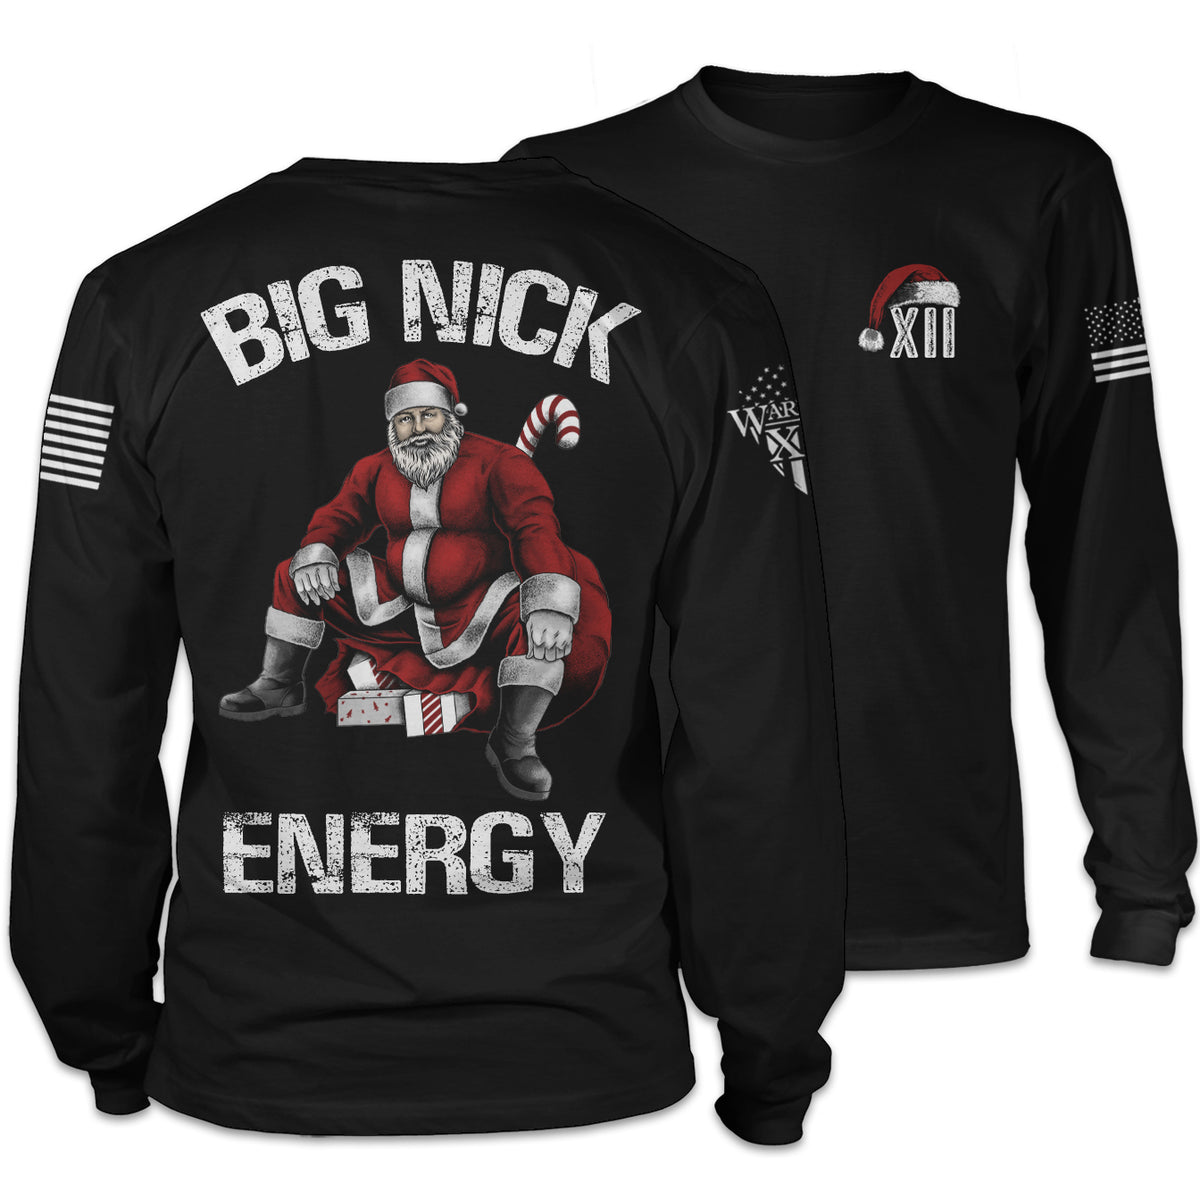 A black long sleeve shirt featuring an image on the back of Santa sitting on a bag of presents with the words "Big Nick Energy" and the front featuring a small pocket image of a Santa hat.